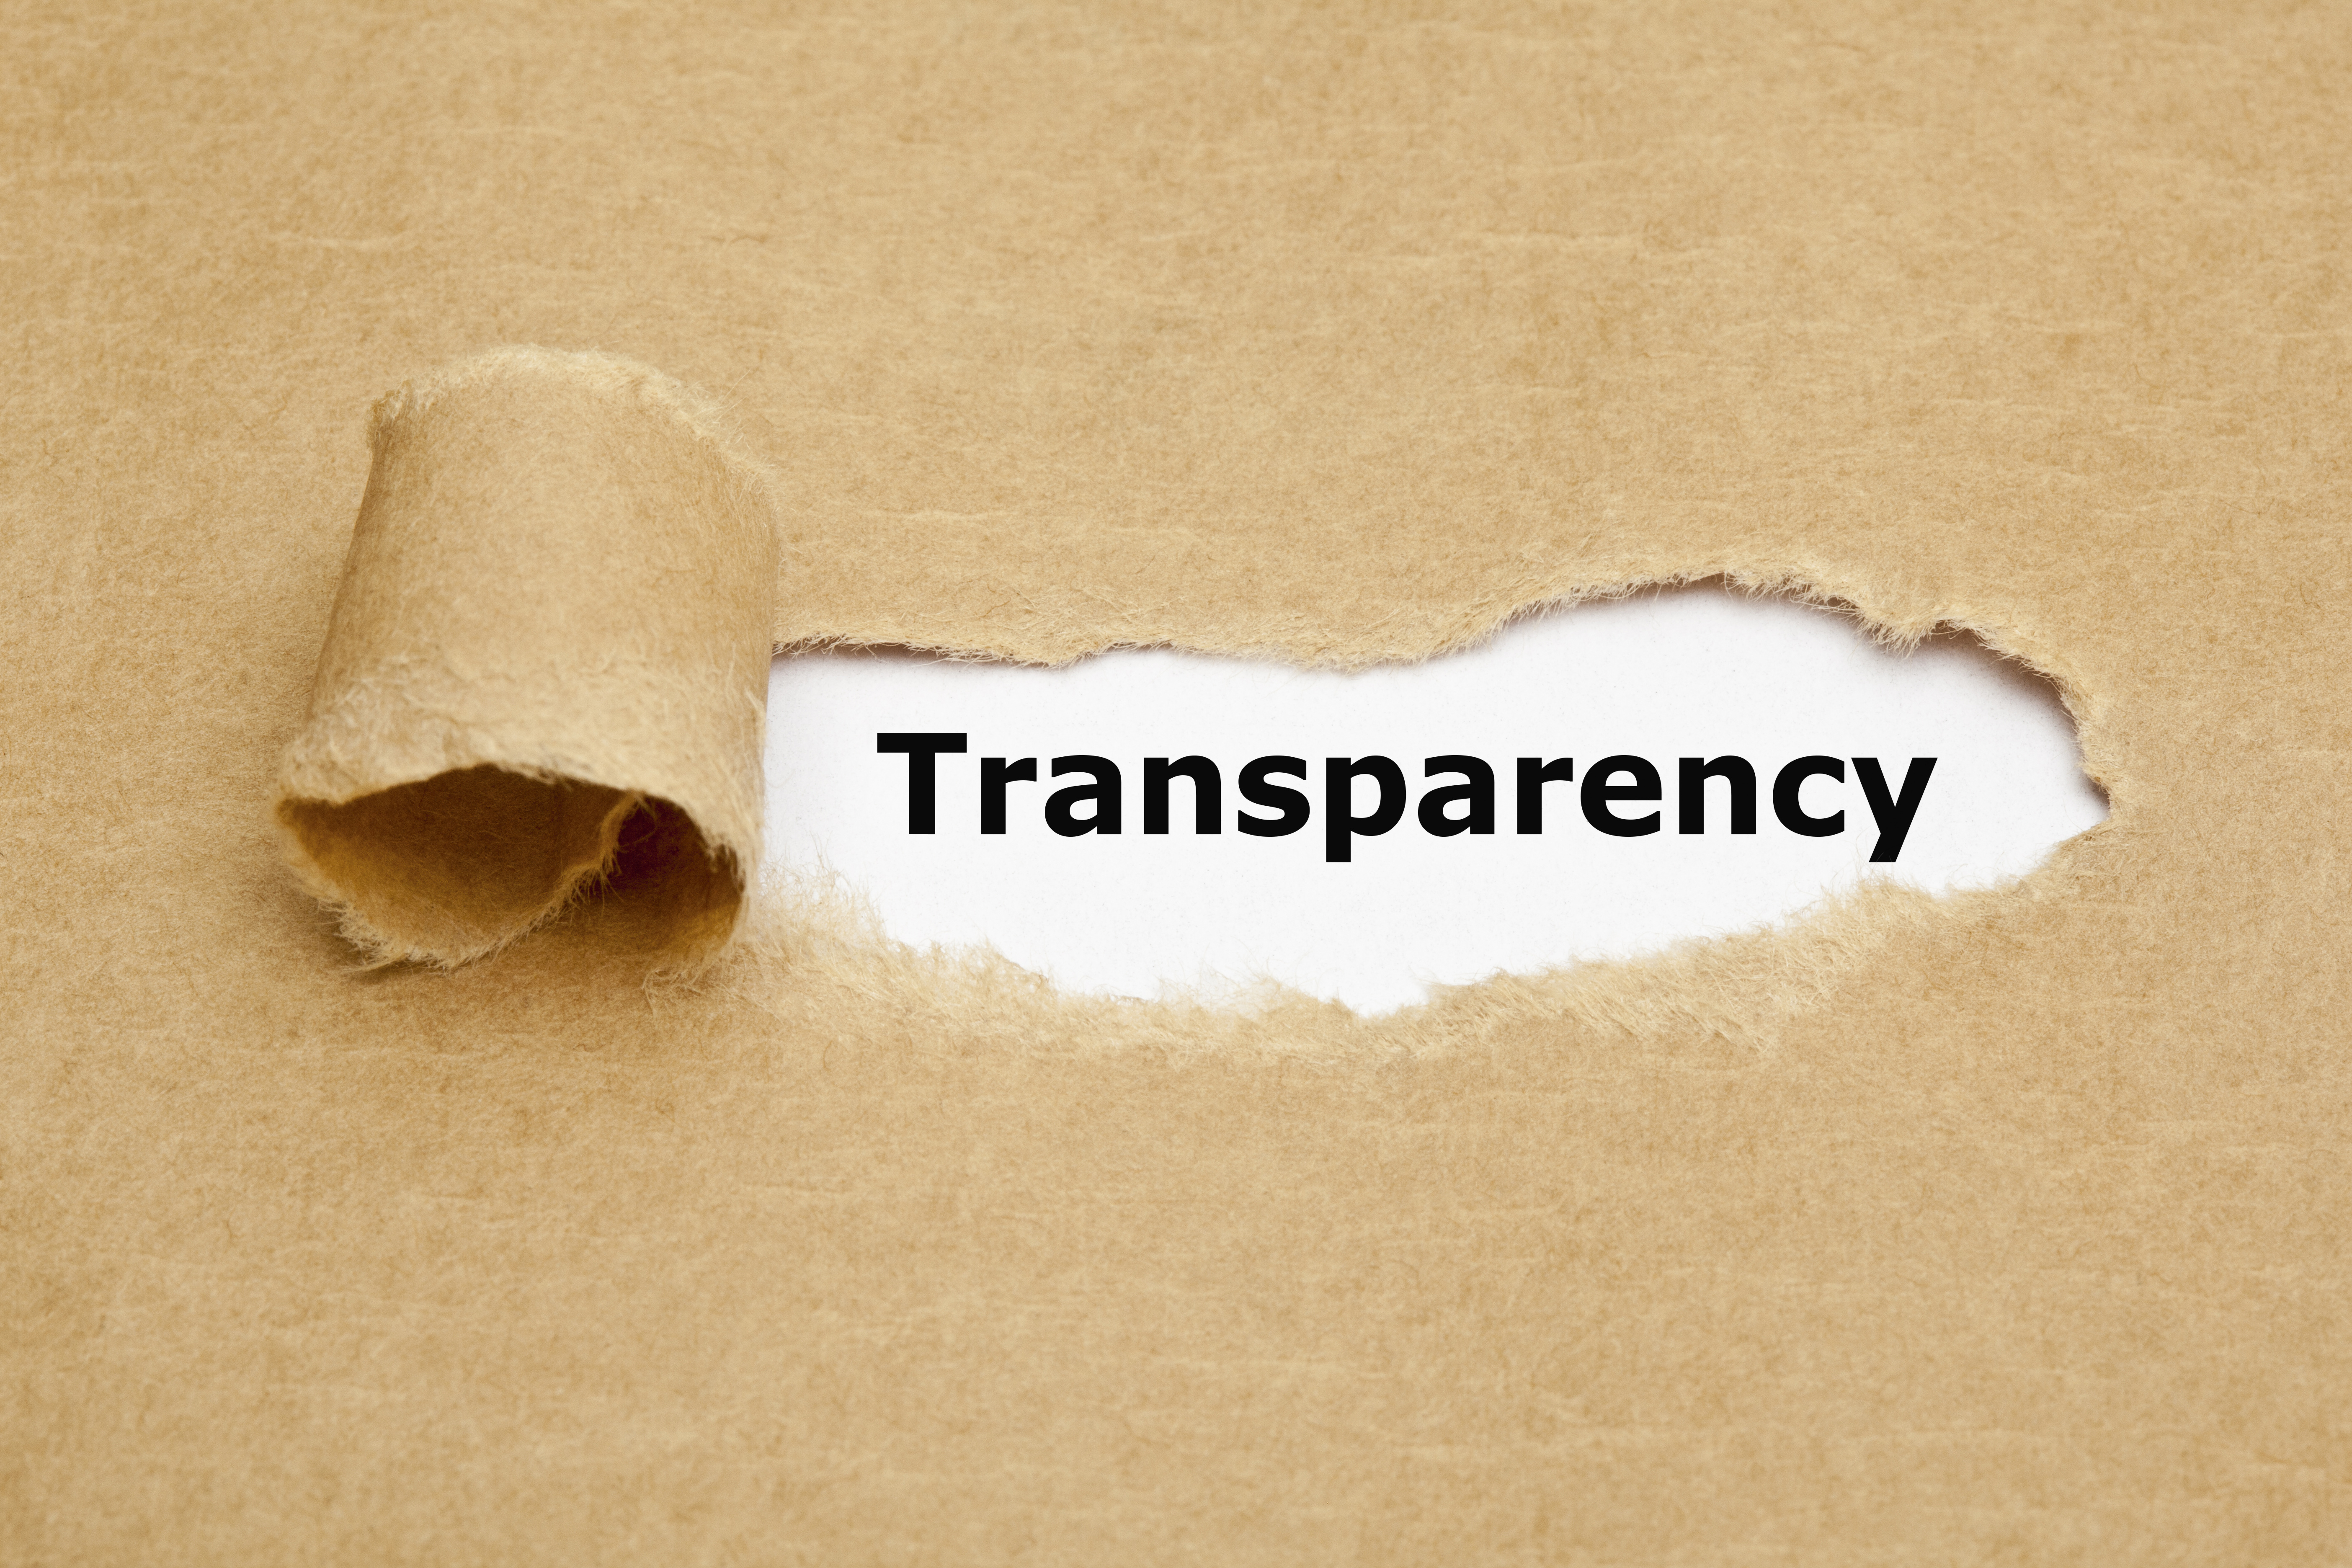 Gov't to Enforce Transparency in State Entities